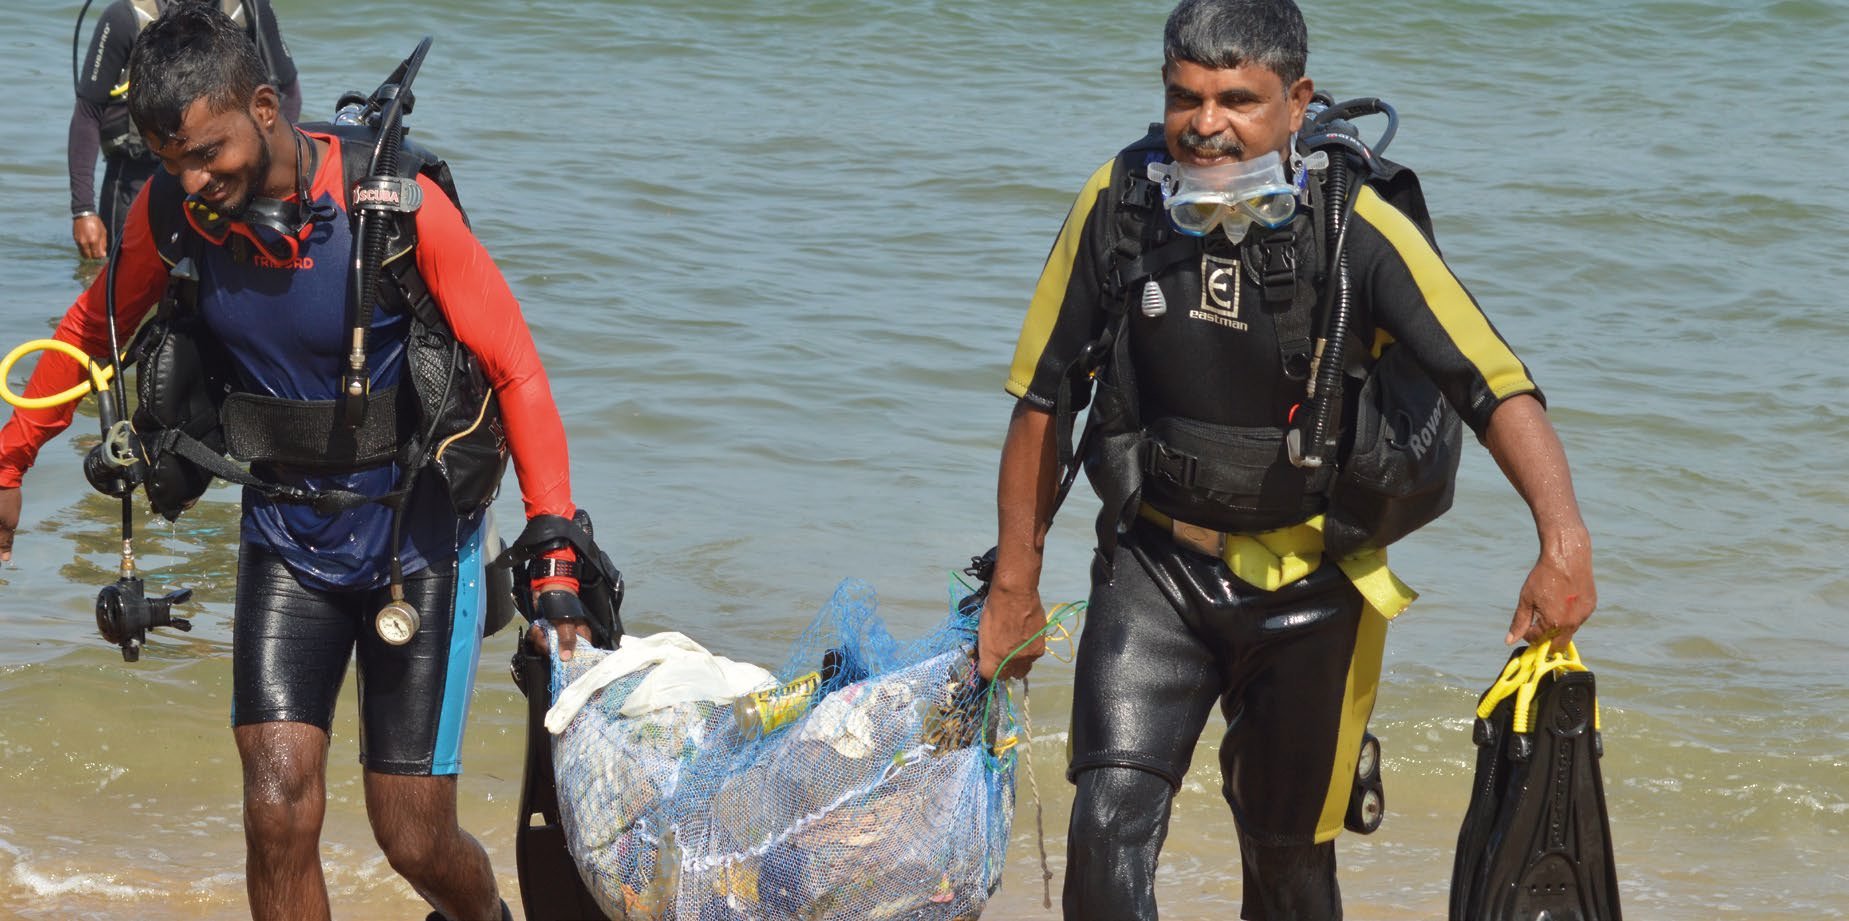 Ocean clean-up underway on the shores of Kerala, India.